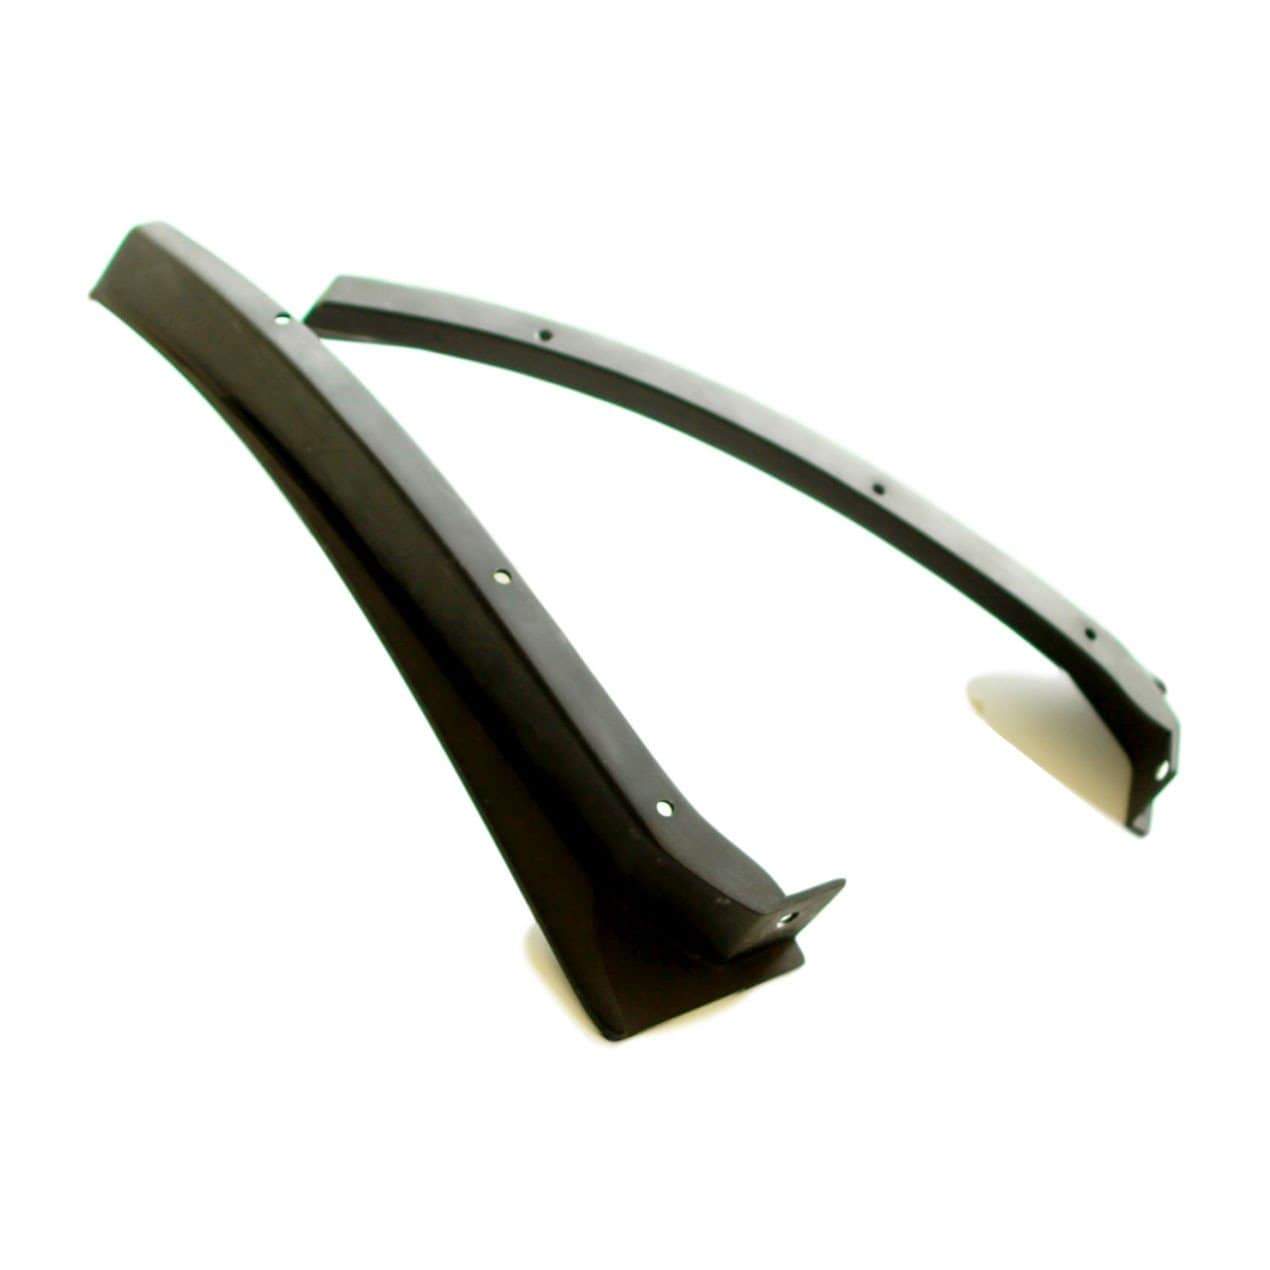 ACS Composite T4 Front Wheel Deflectors for Camaro [33-4-113]SBK, designed for optimal aerodynamics with T4 Splitter. Durable RTM composite material in satin black finish.